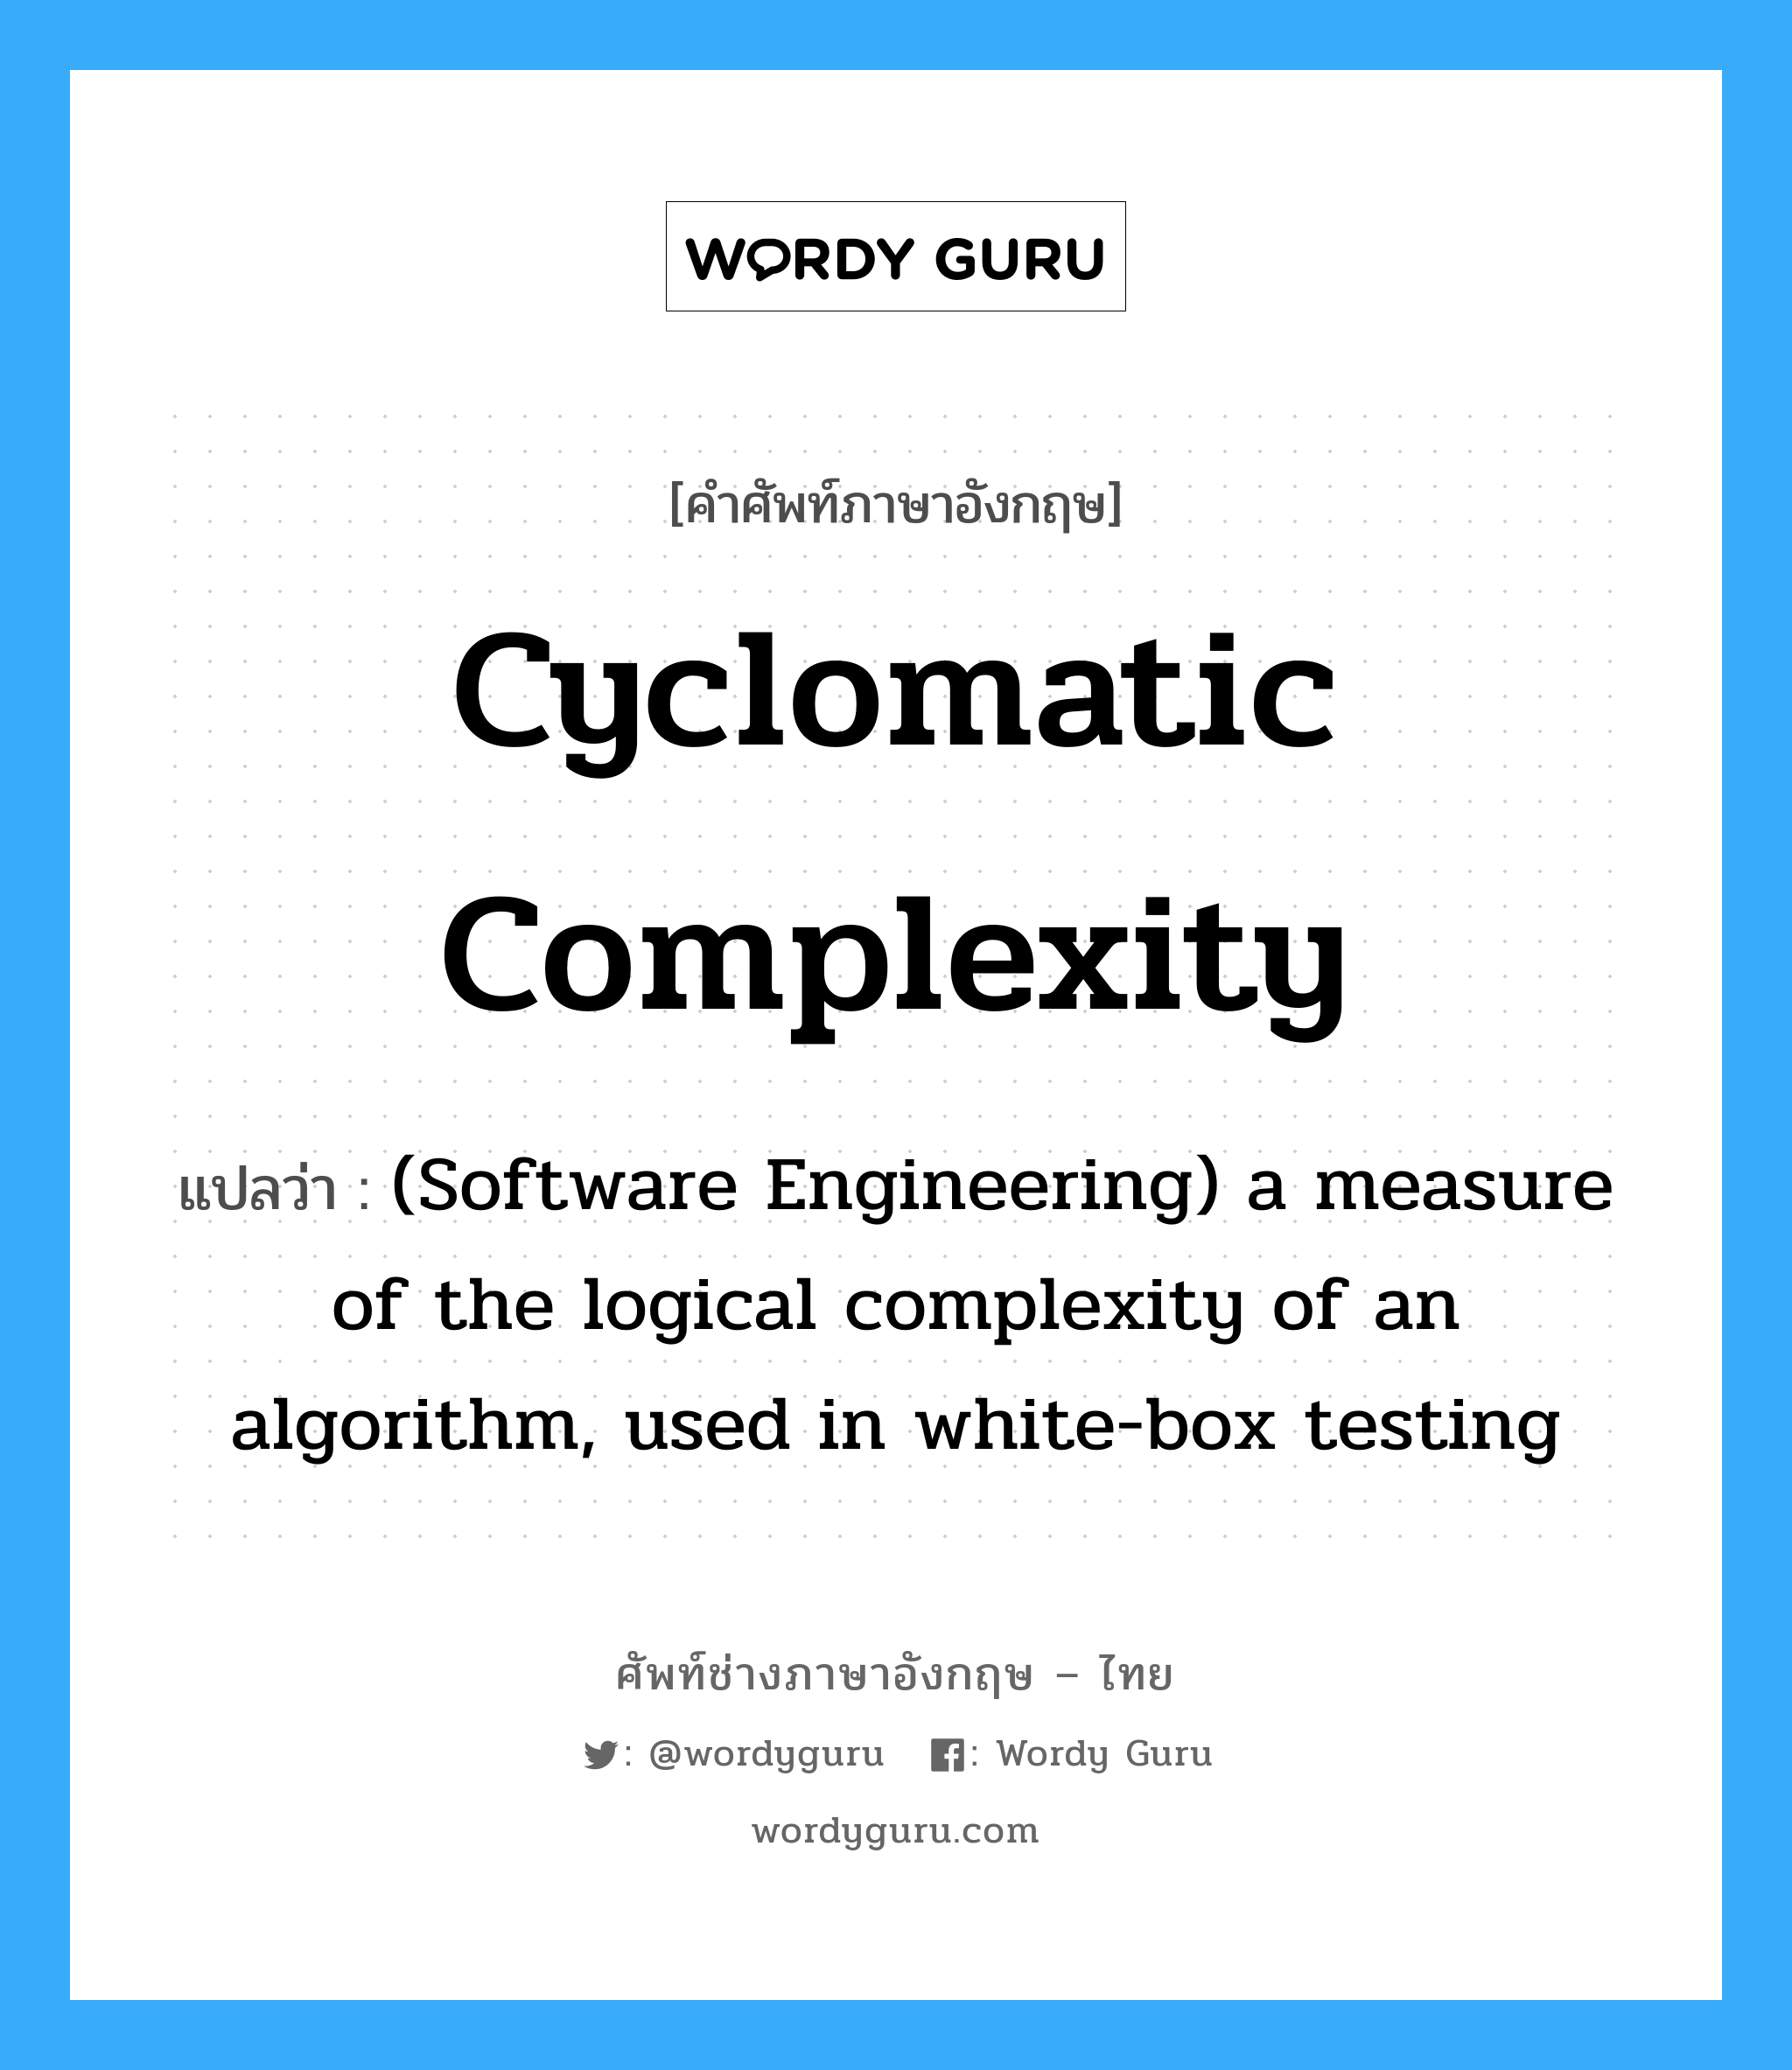 Cyclomatic complexity แปลว่า?, คำศัพท์ช่างภาษาอังกฤษ - ไทย Cyclomatic complexity คำศัพท์ภาษาอังกฤษ Cyclomatic complexity แปลว่า (Software Engineering) a measure of the logical complexity of an algorithm, used in white-box testing